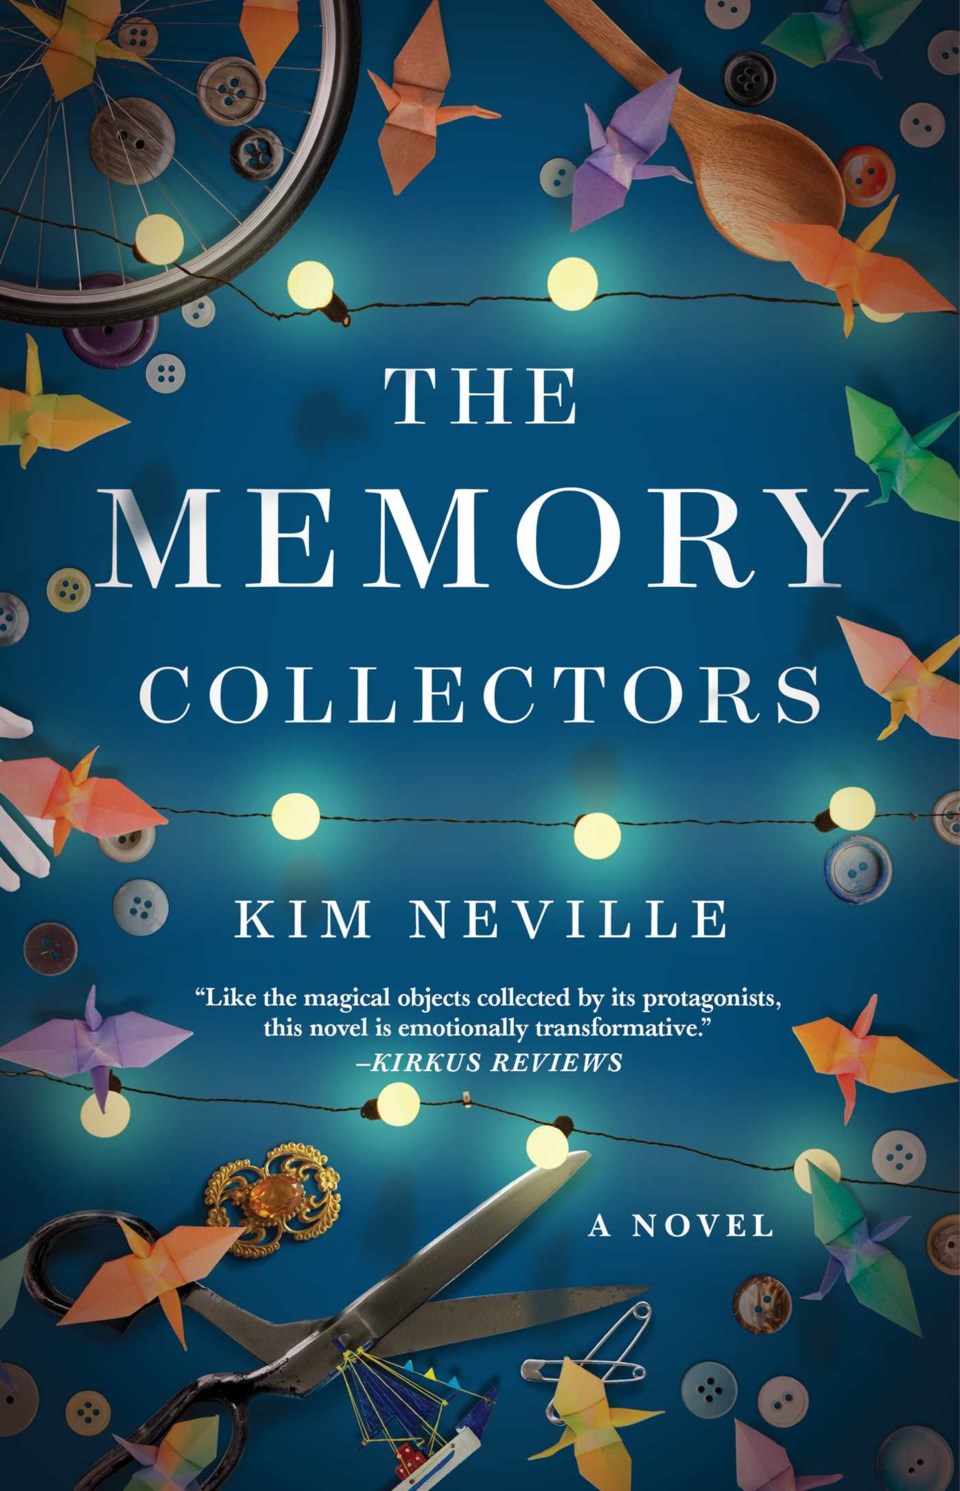 The memory collector